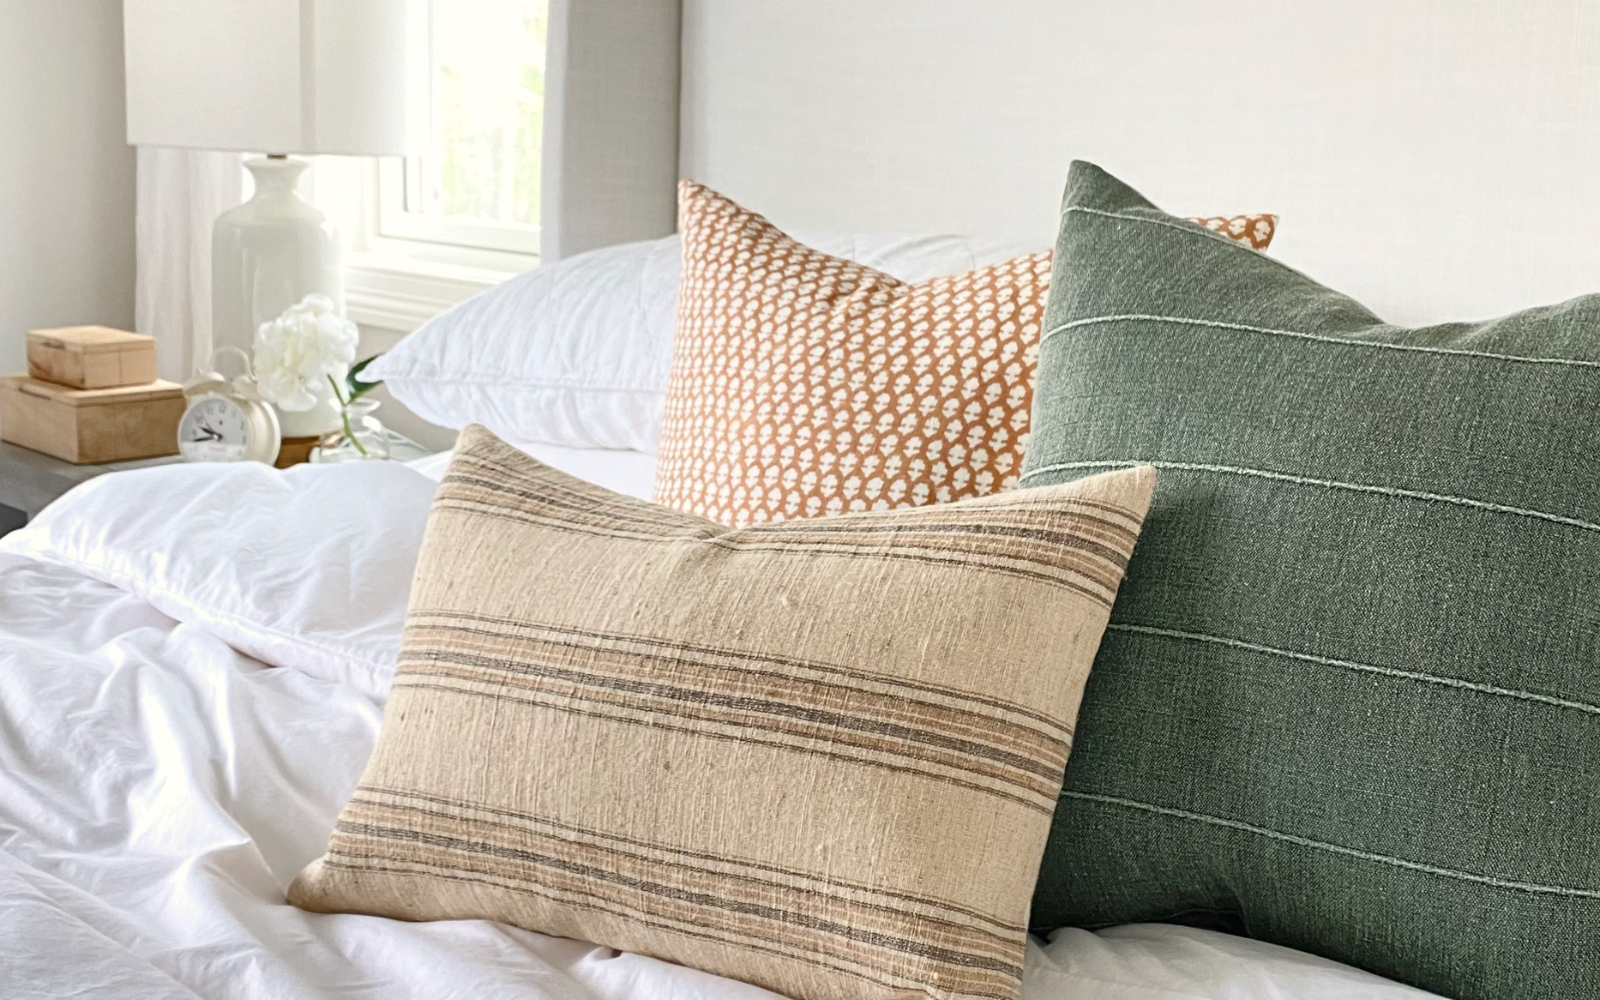 Cream, green, and neutral colored throw pillow arrangement on top of a white bed